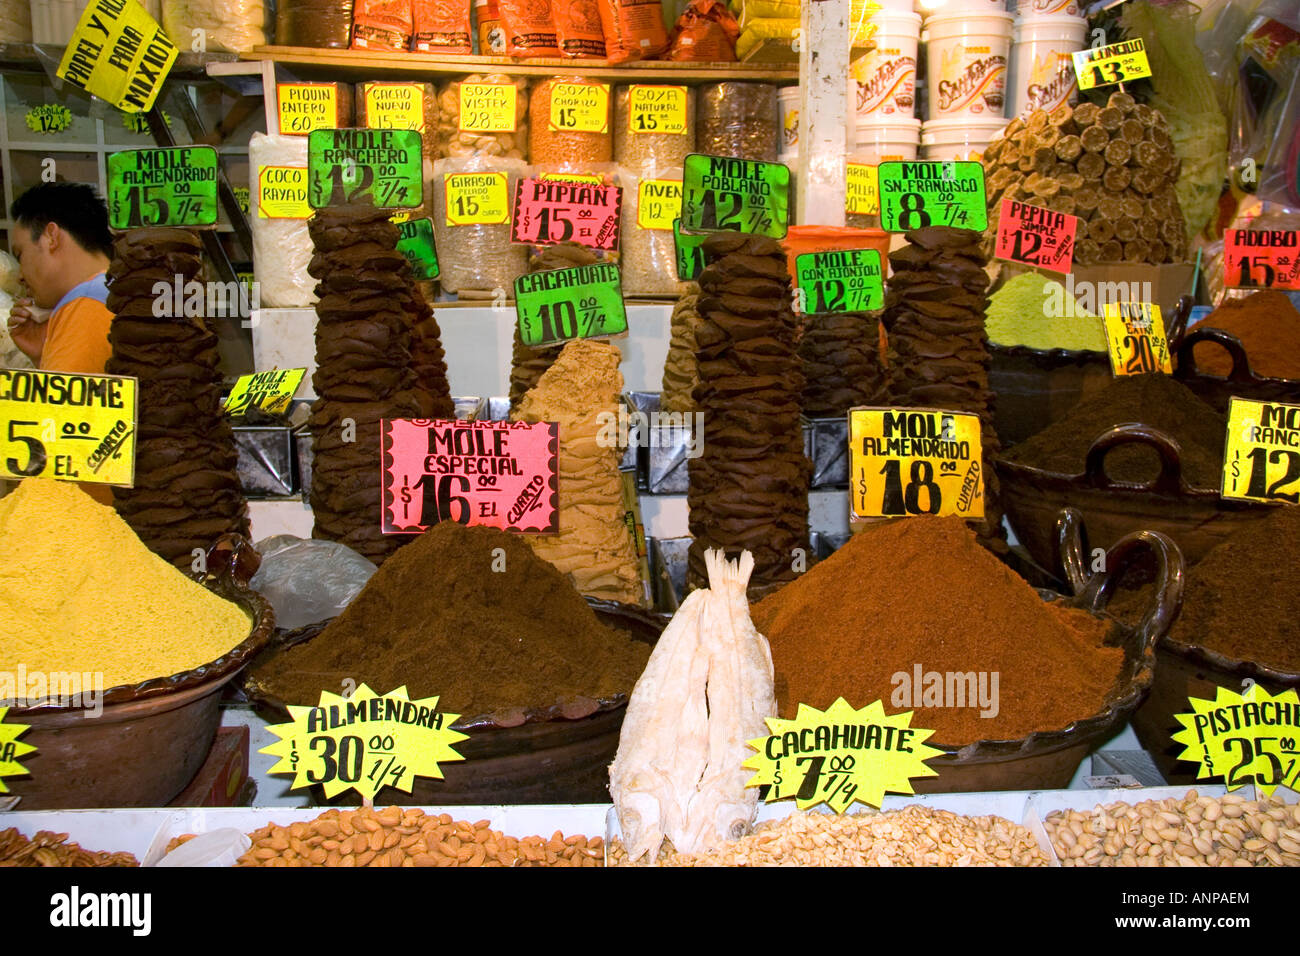 Mole pastes and powders being sold at the Merced Market in Mexico City Mexico Stock Photo